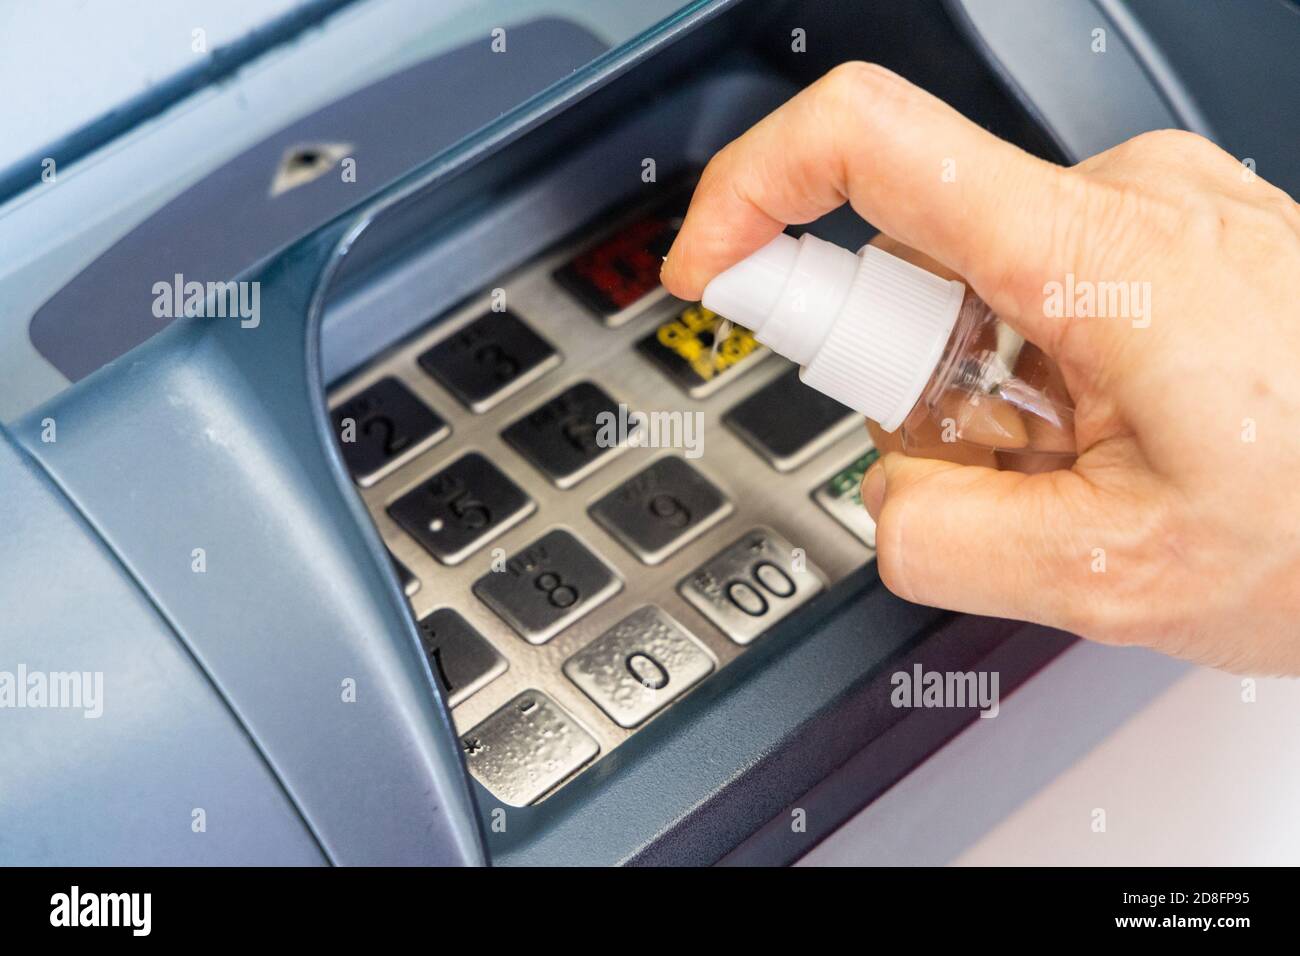 Person spraying sanitizer disinfectant onto ATM key pad to kill germs Stock Photo